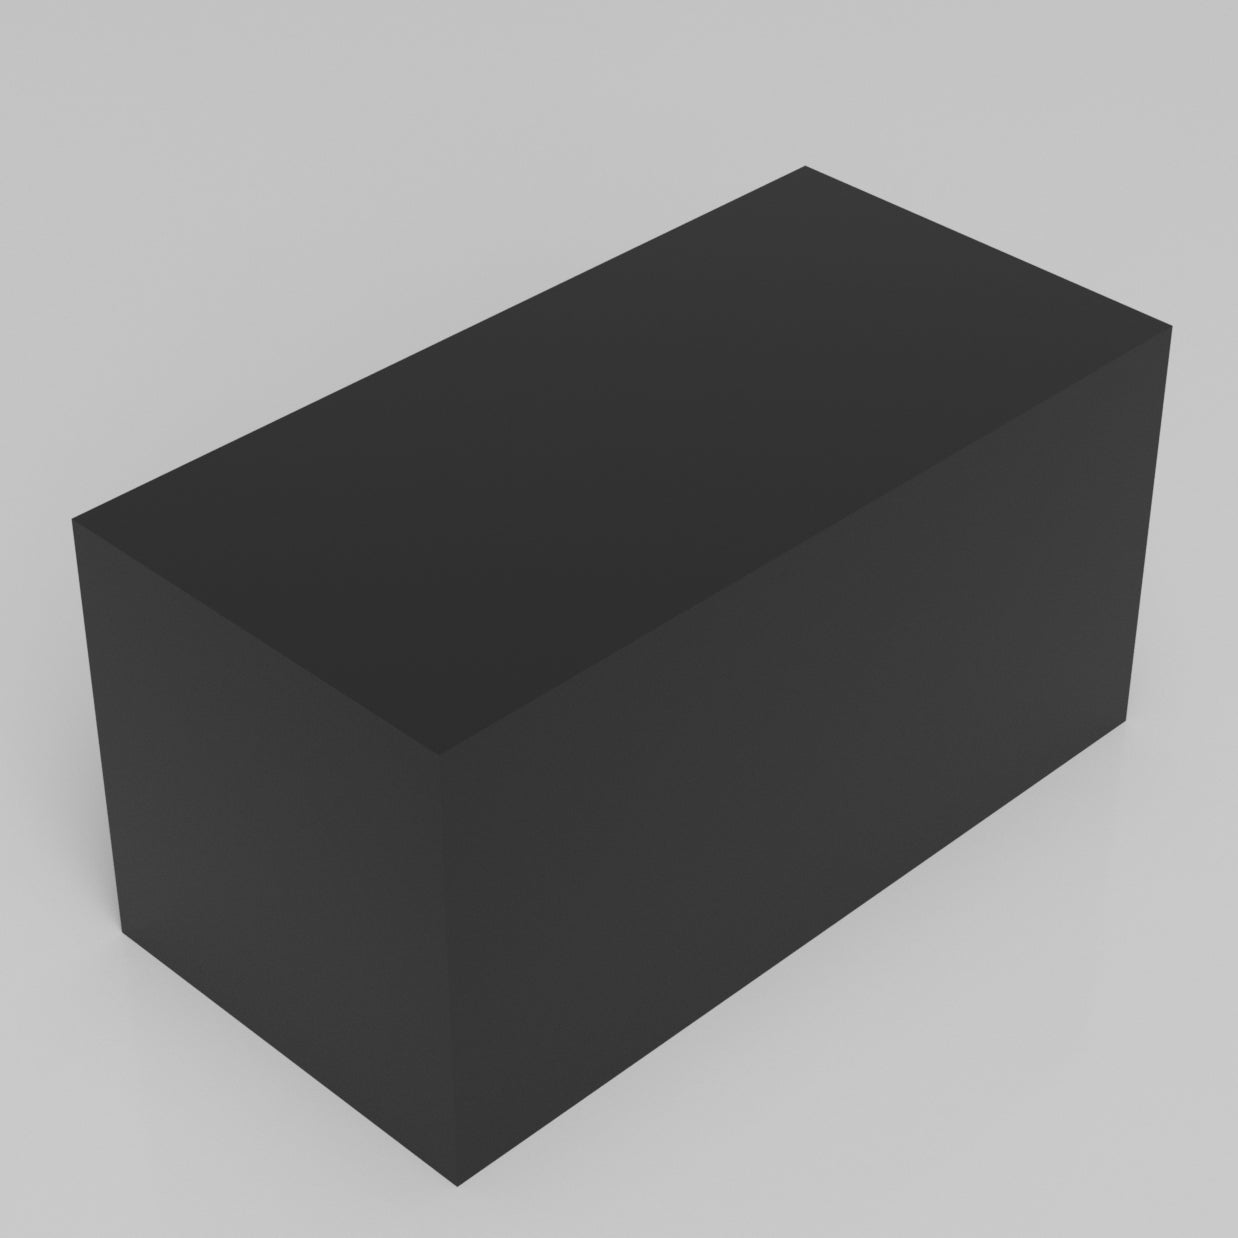 Machinable Wax Rectangular Block Front View 3 Inch by 3 Inch by 6 Inch